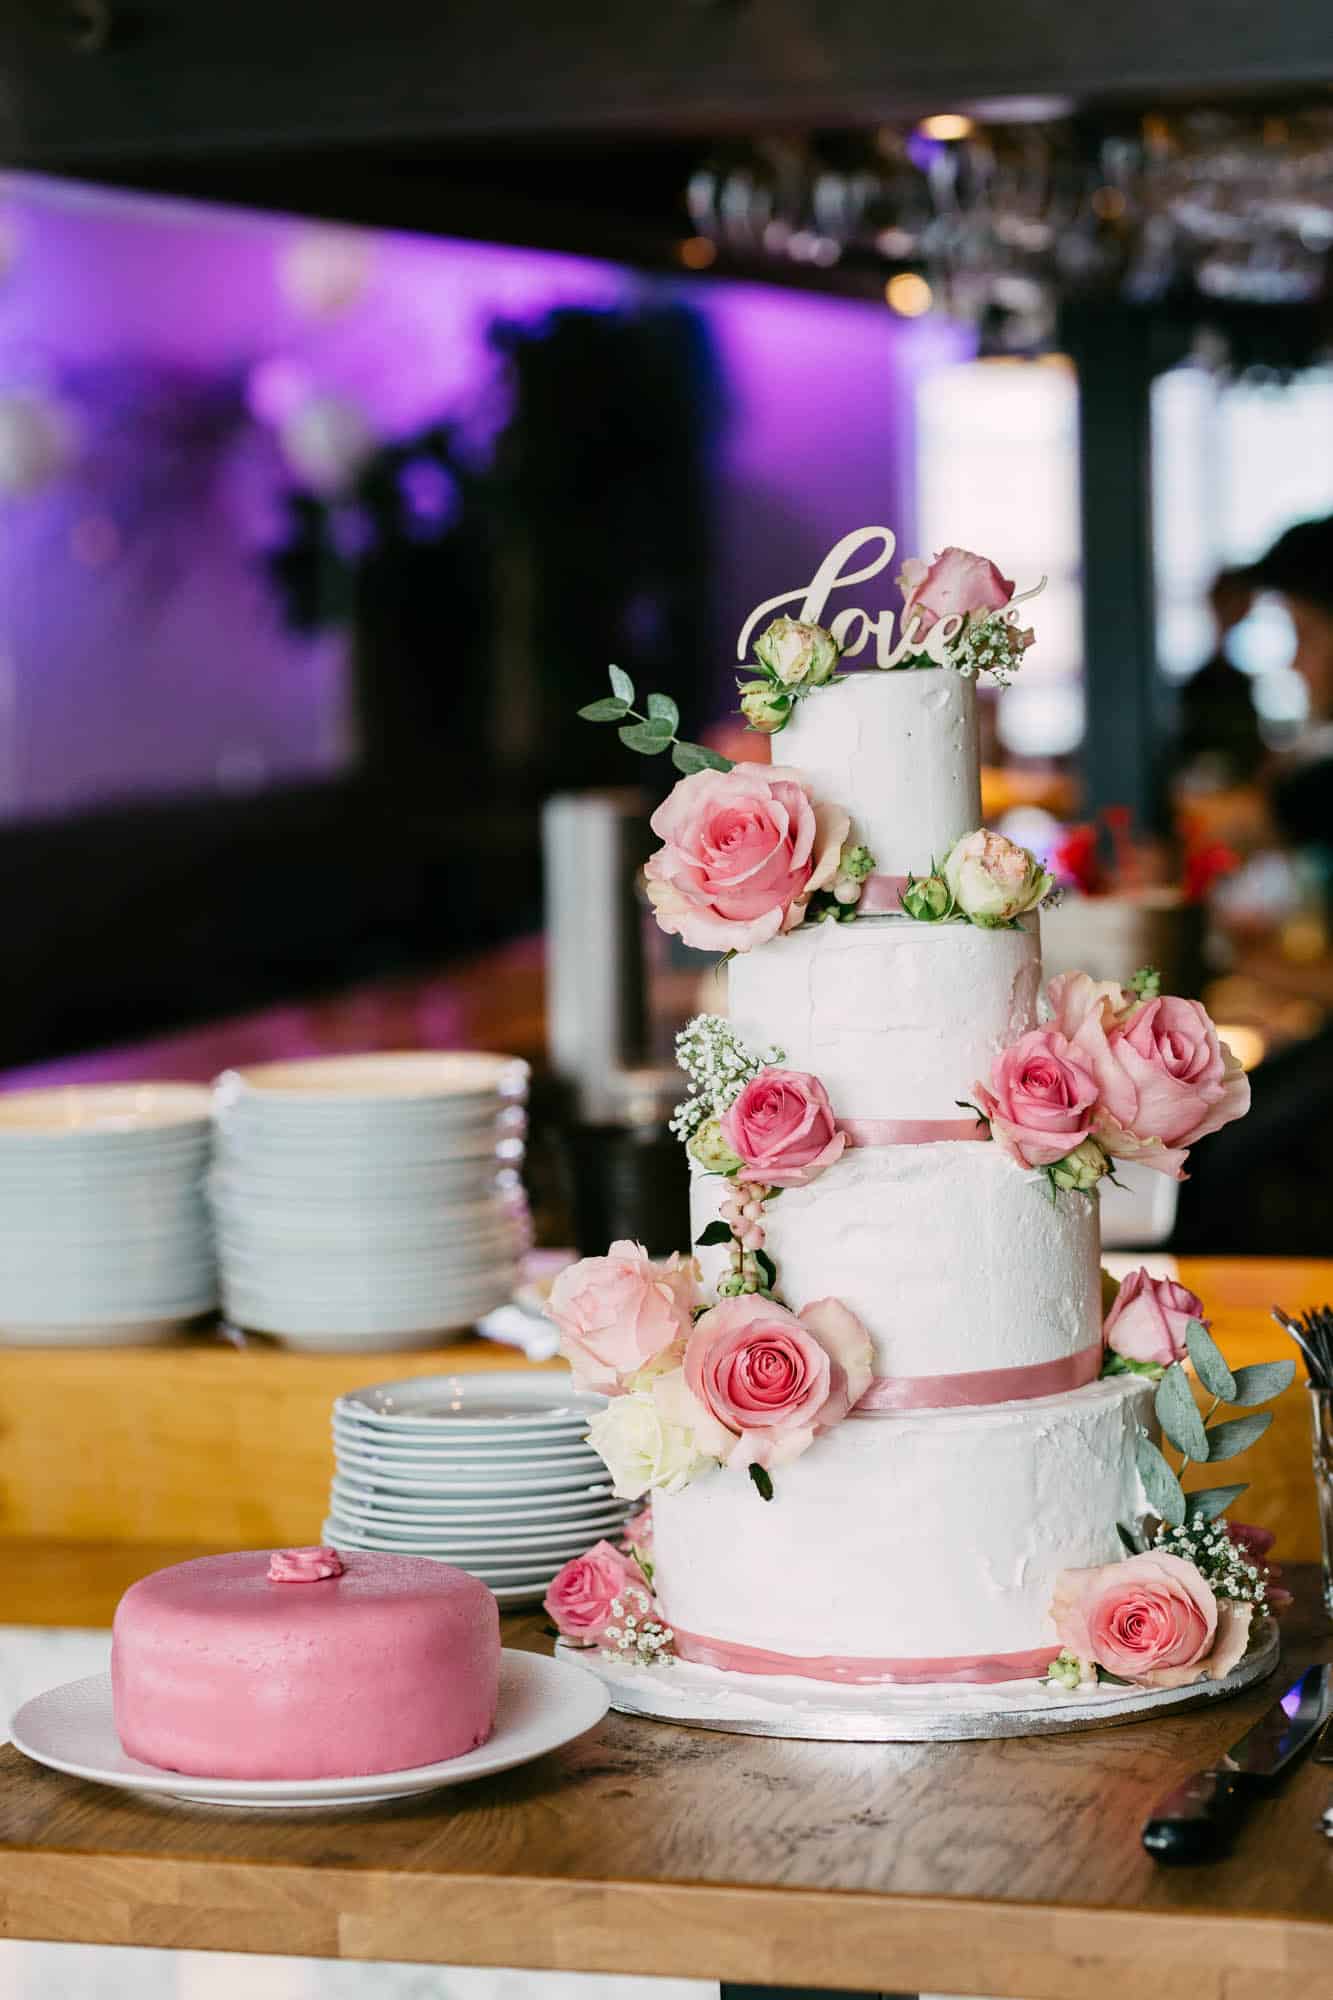 White wedding cake with pink roses and love on top.